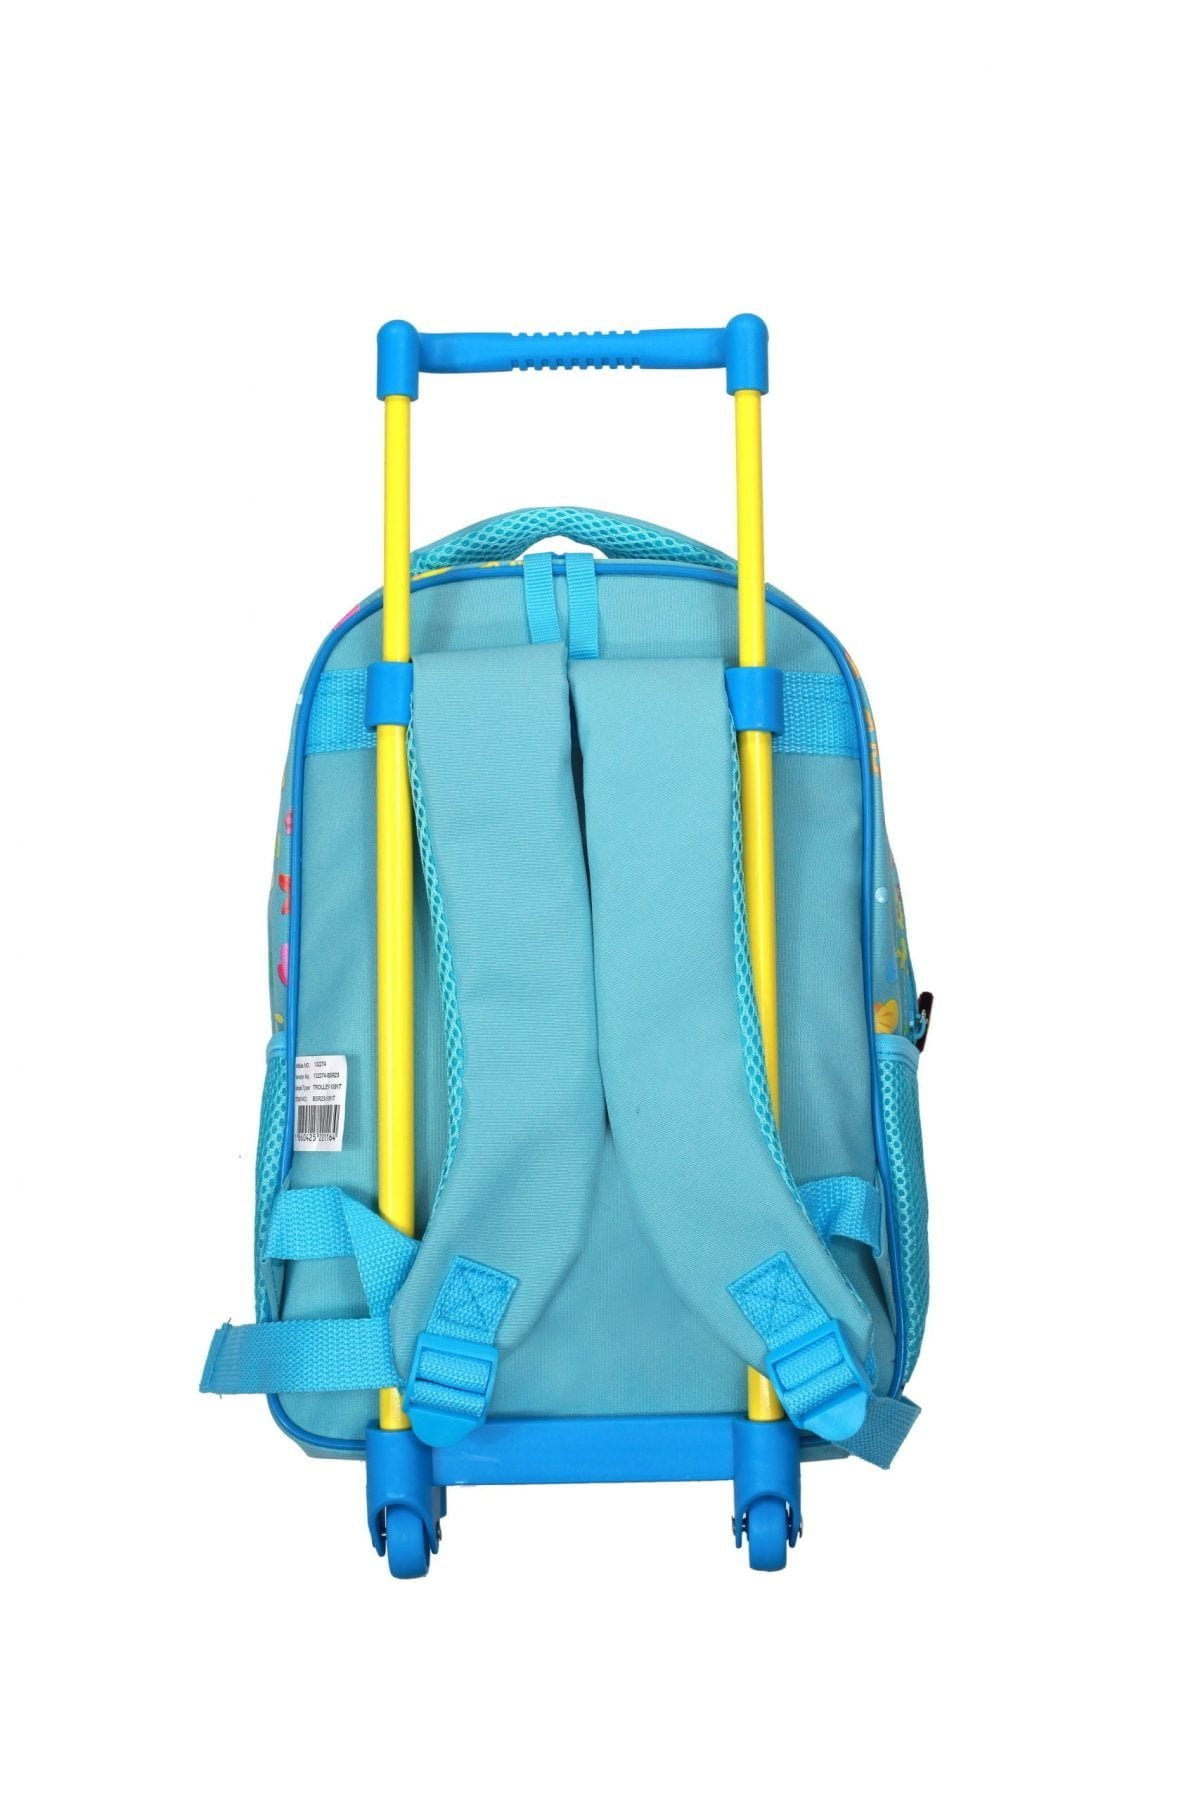 Bsr23 1091T 3 Scaled The Trolley Bag Is A Reliable Companion For Your Journey. The Trolley Features Main Zip Compartment To Keep Your Child'S Belonging Or School Items. The Trolley Has Comfortable Handle On The Top. The Fine Quality Material And Printing Makes It Durable And Stylish Option. It Is Easy To Zip And Unzip With Smooth Zippers And Pullers. The Wheels On The Bottom Make It Easy To Drag. Wipe With A Clean And Dry Cloth. Baby Shark Trolley Bag 13 Baby Shark Trolley Bag 13&Quot; - 2 Main Compartments And 2 Side Pockets (Blue)